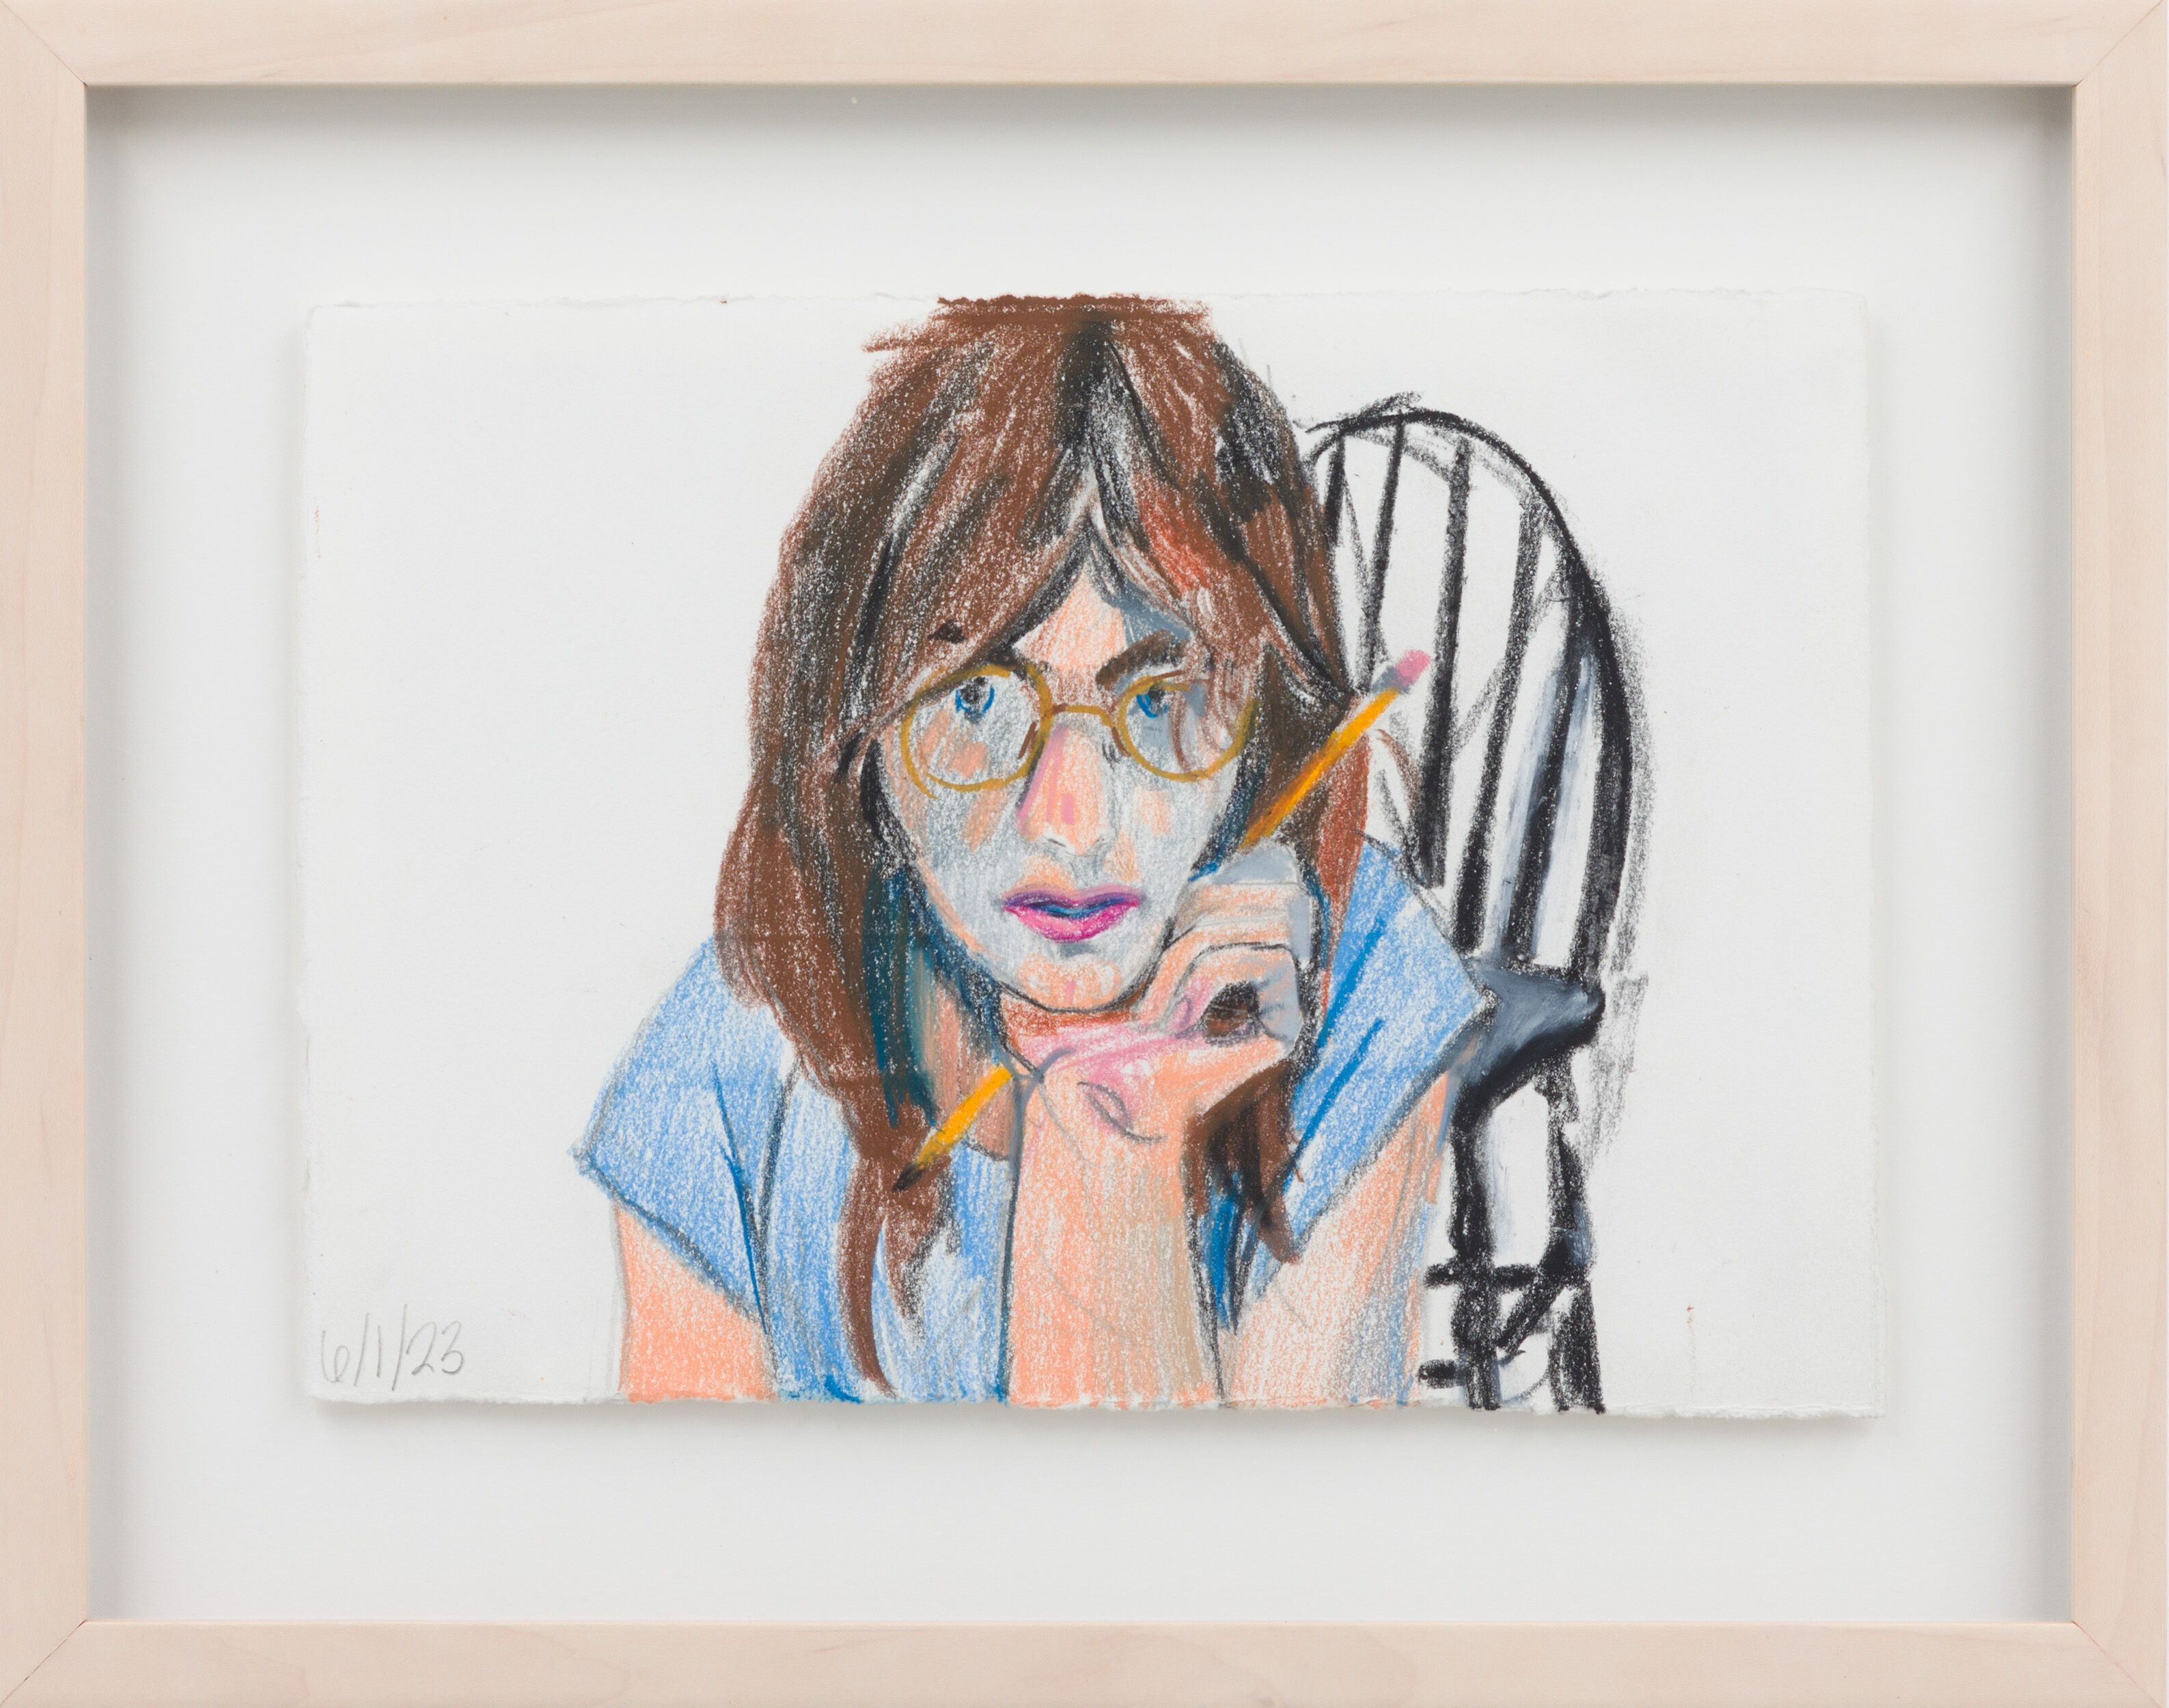 A crayon and graphite self-portrait by the artist Michelle Uckotter, seen here holding a pencil